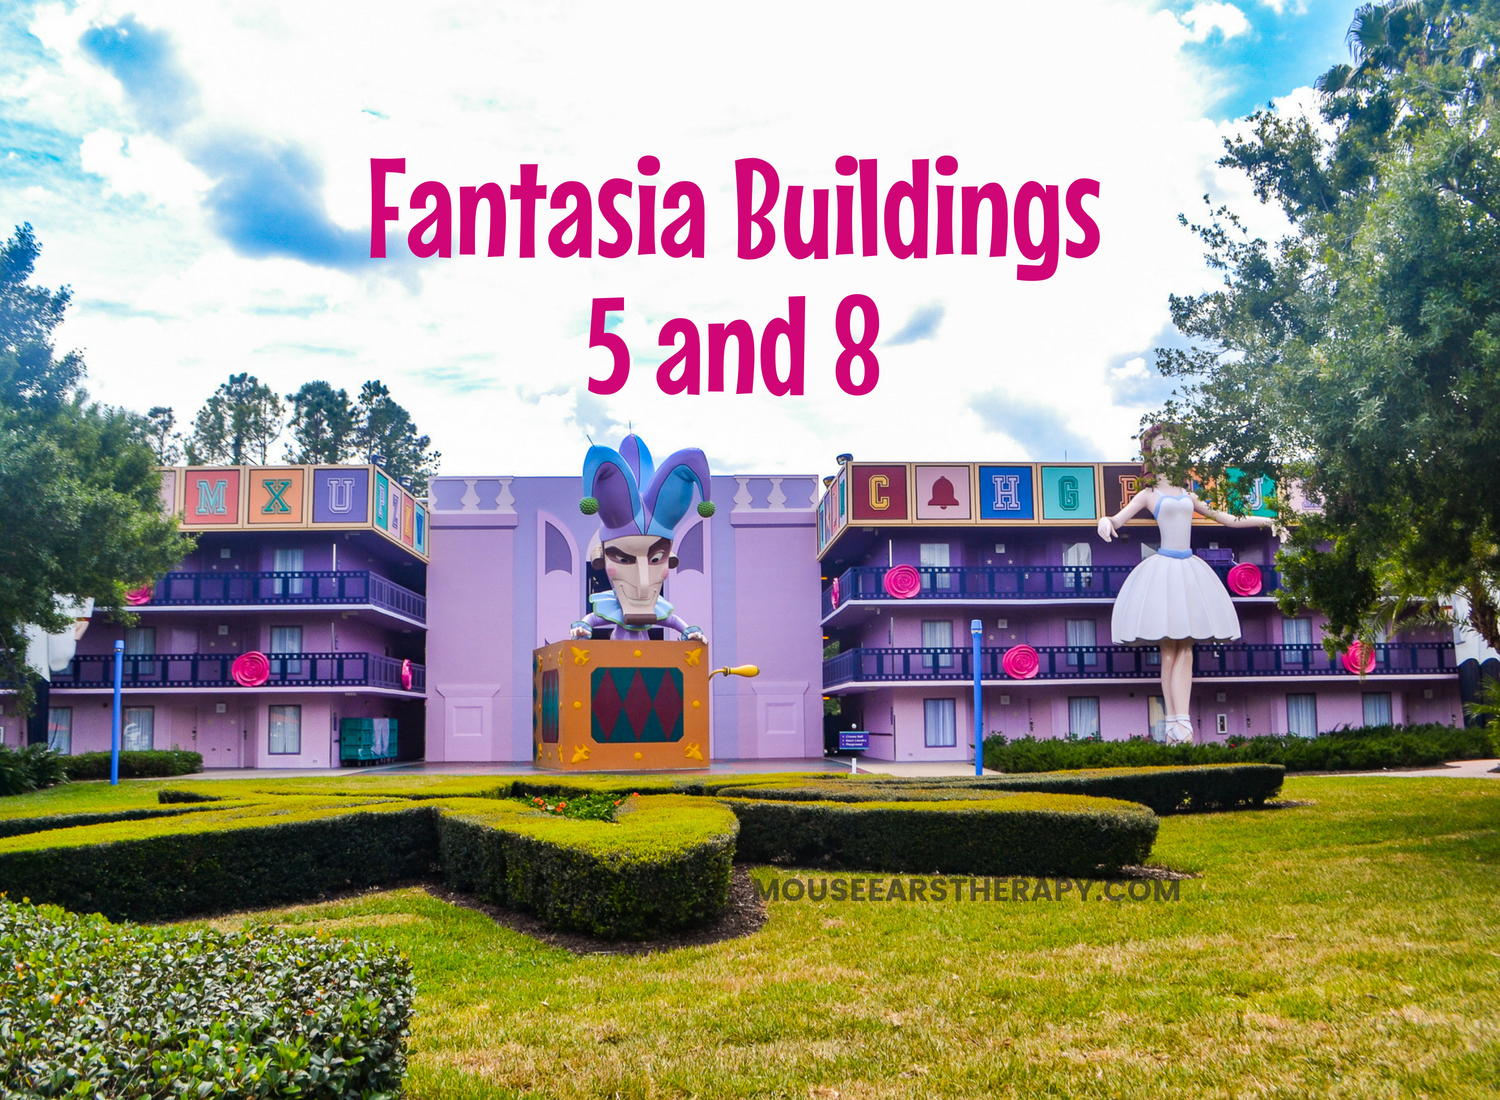 View of Fantasia Buildings 5 and 8 at All Star Movies value resort. 